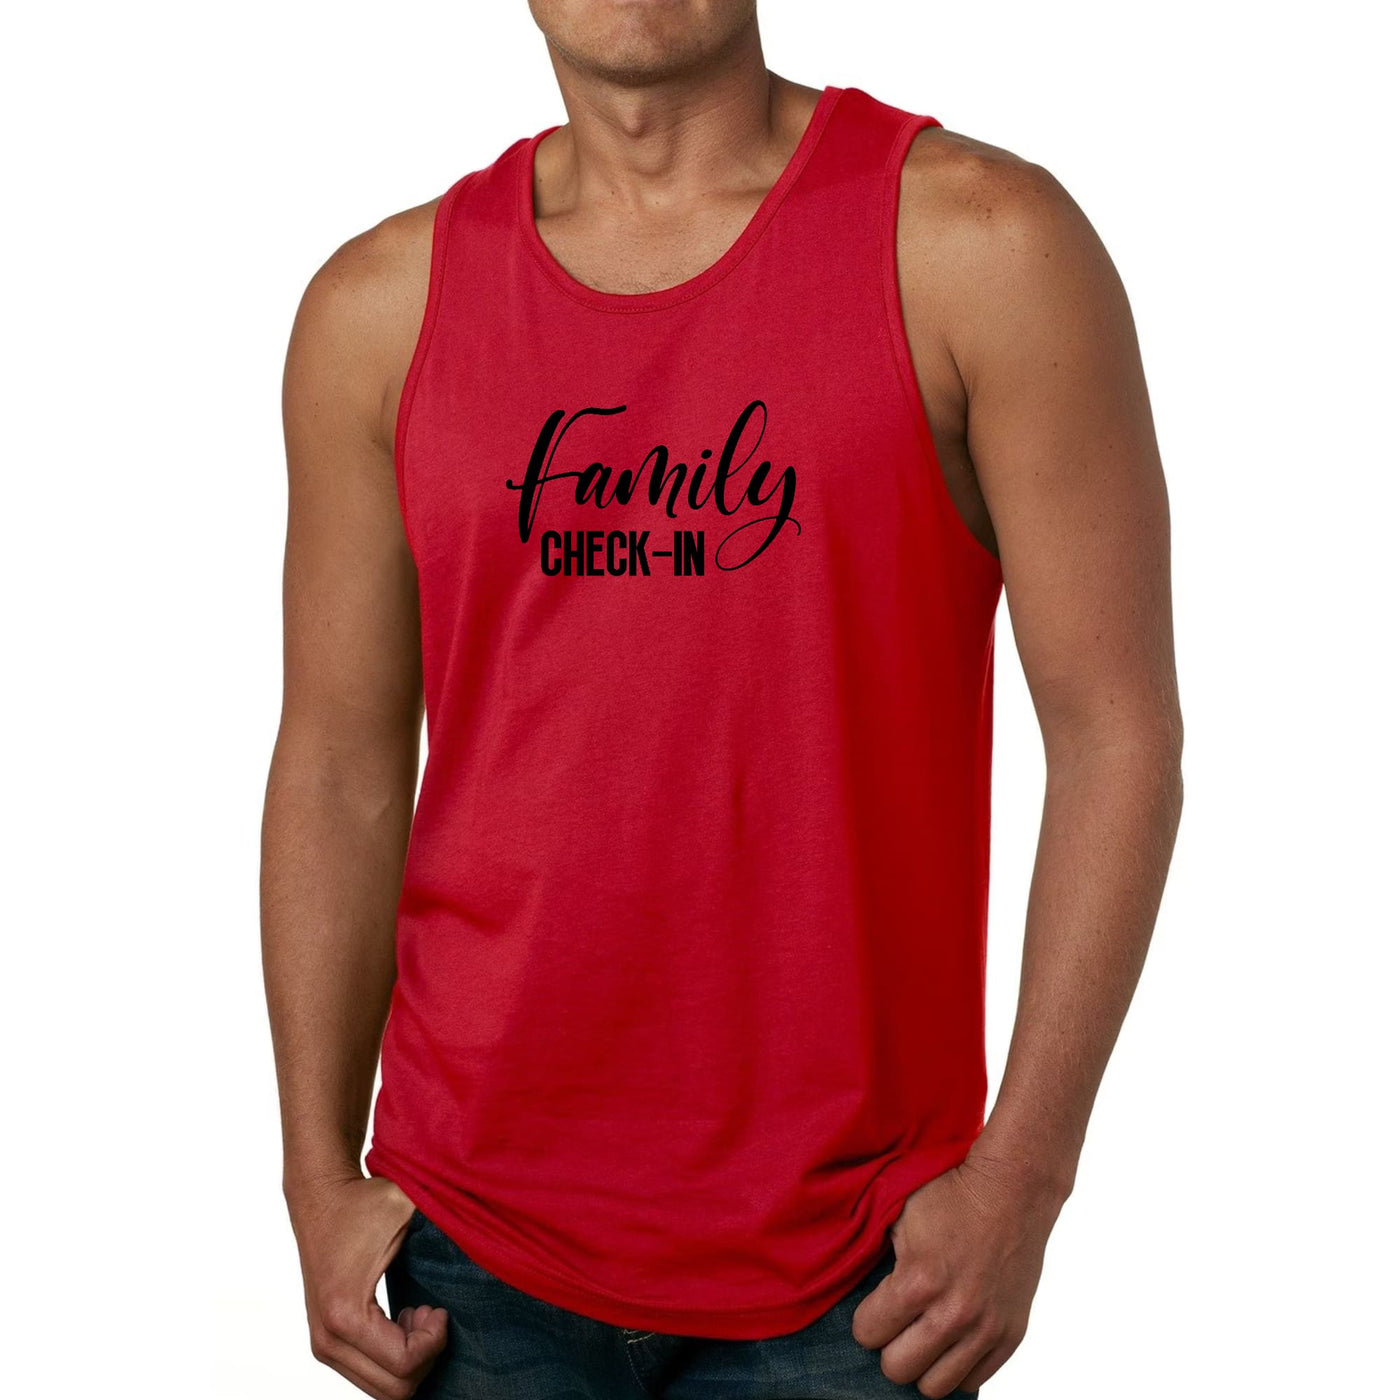 Mens Tank Top Fitness T - shirt Family Check - in Illustration - Tops